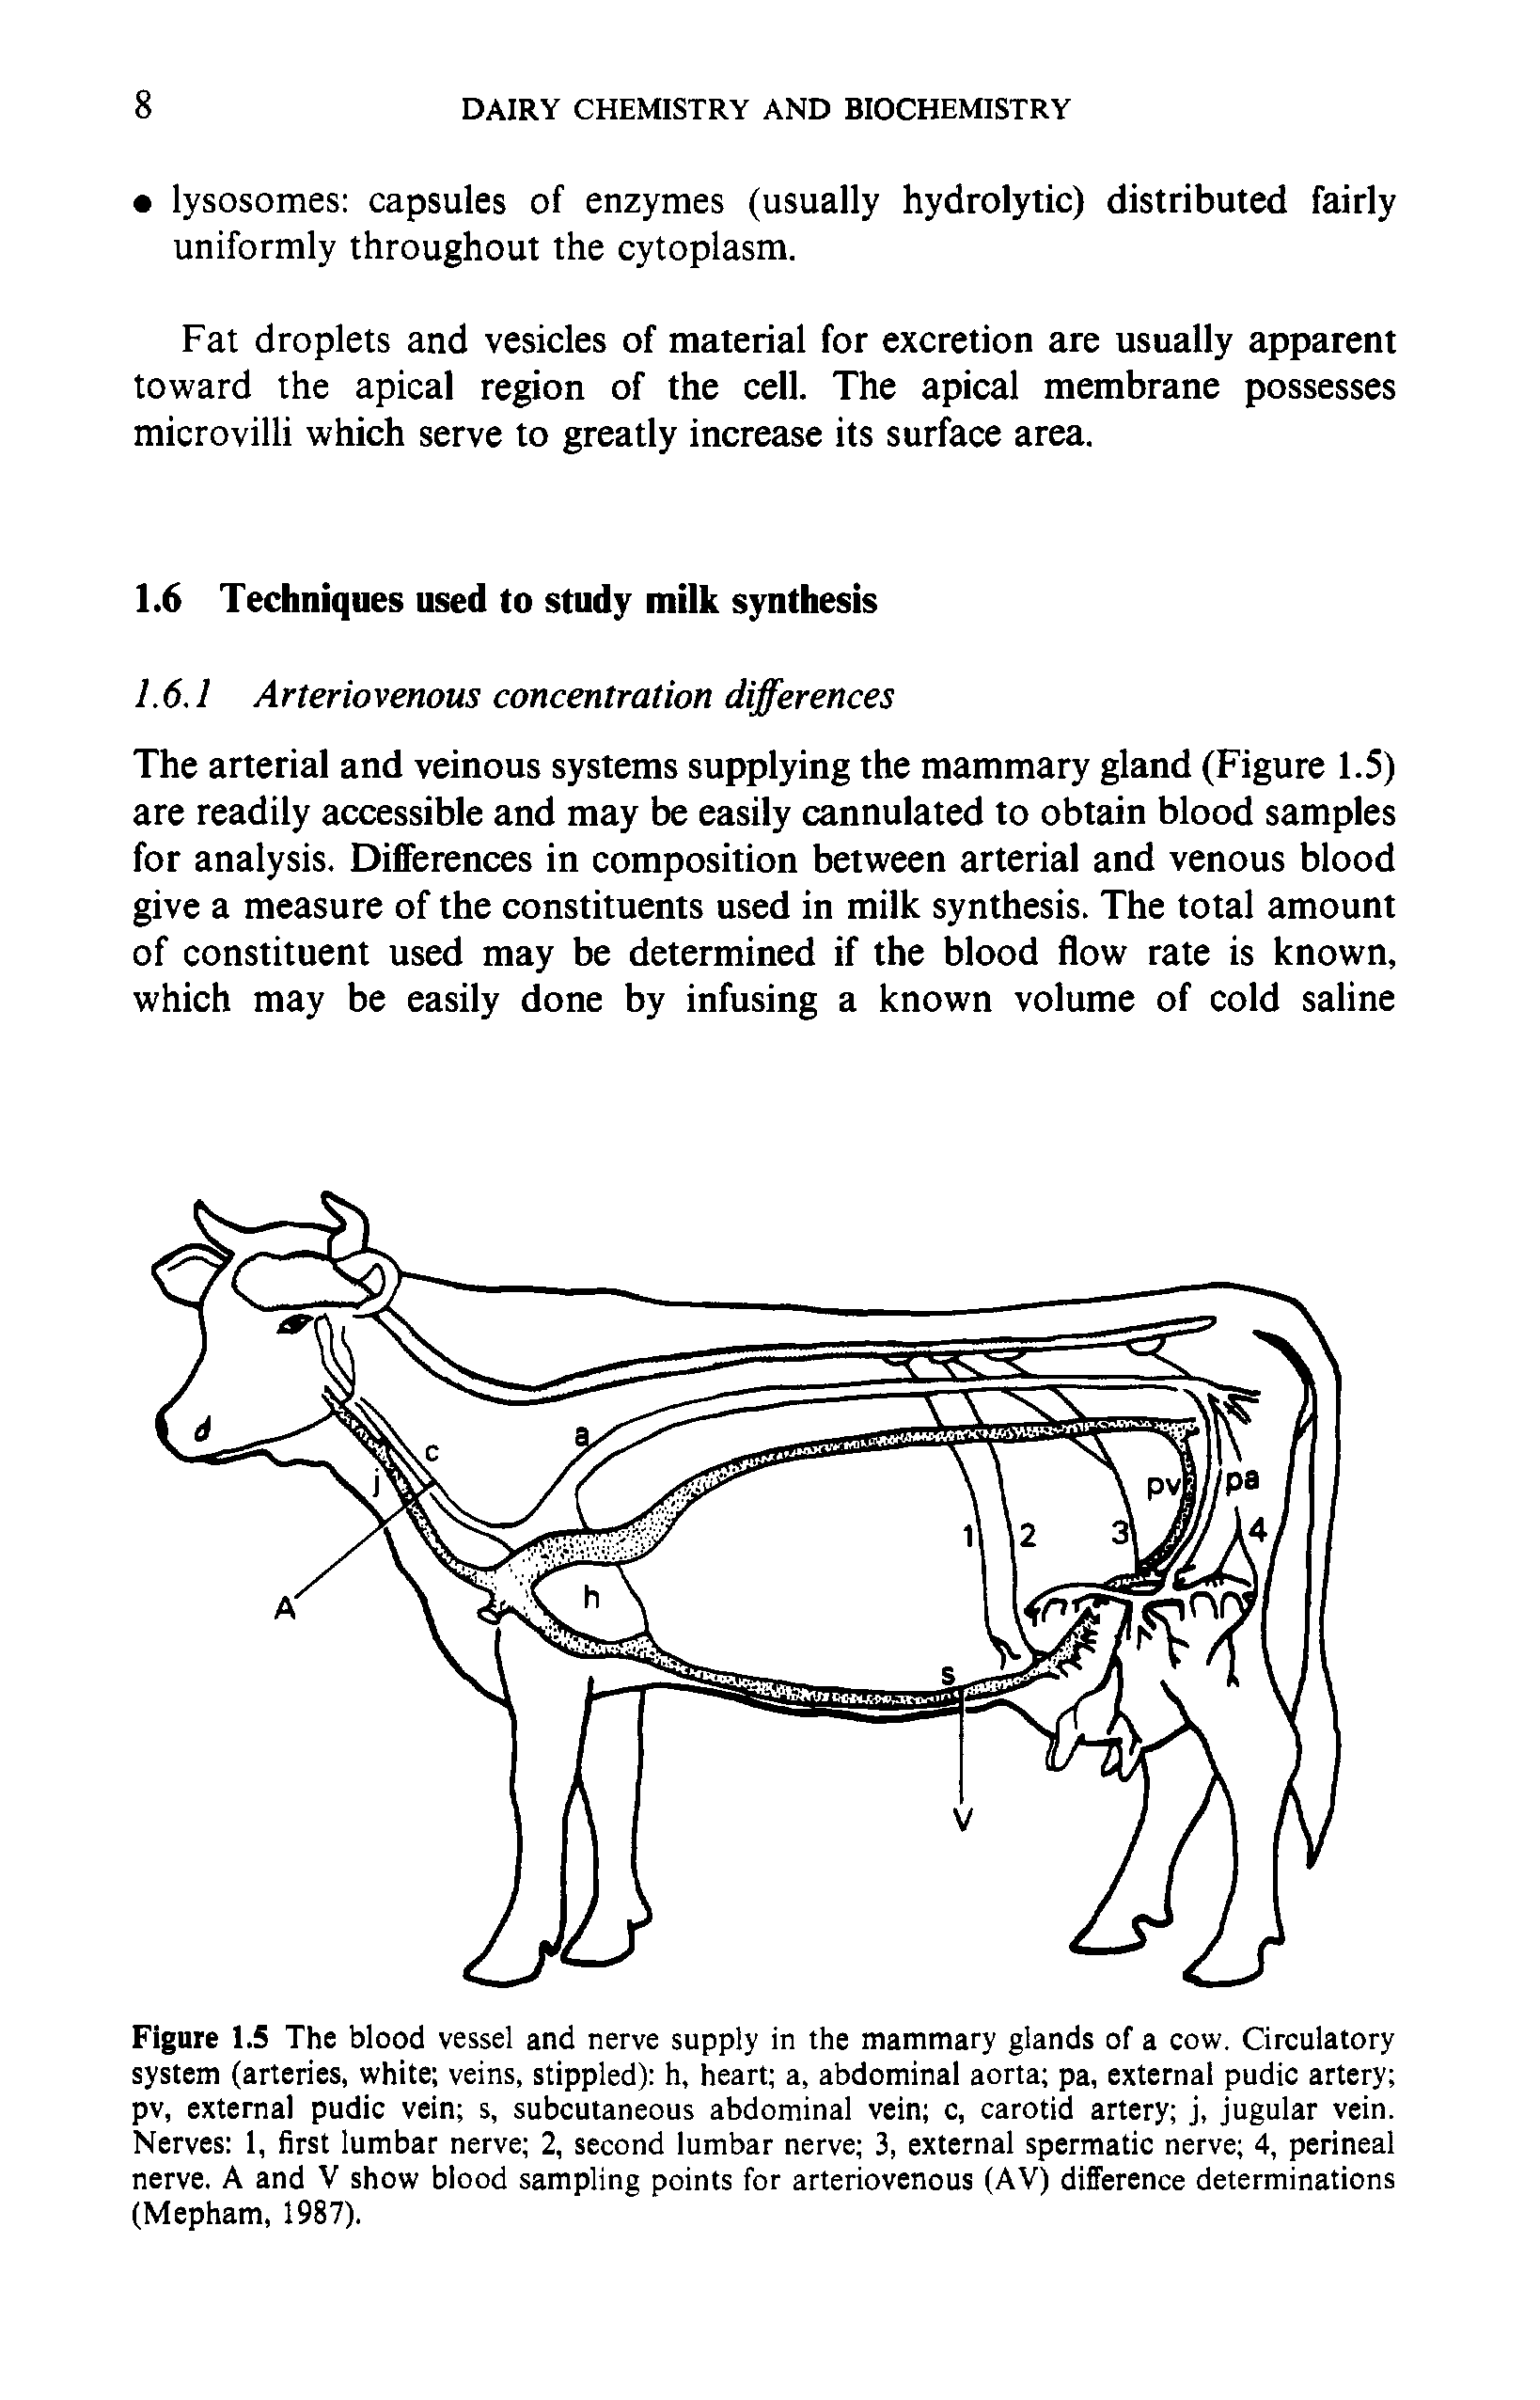 Figure 1.5 The blood vessel and nerve supply in the mammary glands of a cow. Circulatory system (arteries, white veins, stippled) h, heart a, abdominal aorta pa, external pudic artery pv, external pudic vein s, subcutaneous abdominal vein c, carotid artery j, jugular vein. Nerves 1, first lumbar nerve 2, second lumbar nerve 3, external spermatic nerve 4, perineal nerve. A and V show blood sampling points for arteriovenous (AV) difference determinations (Mepham, 1987).